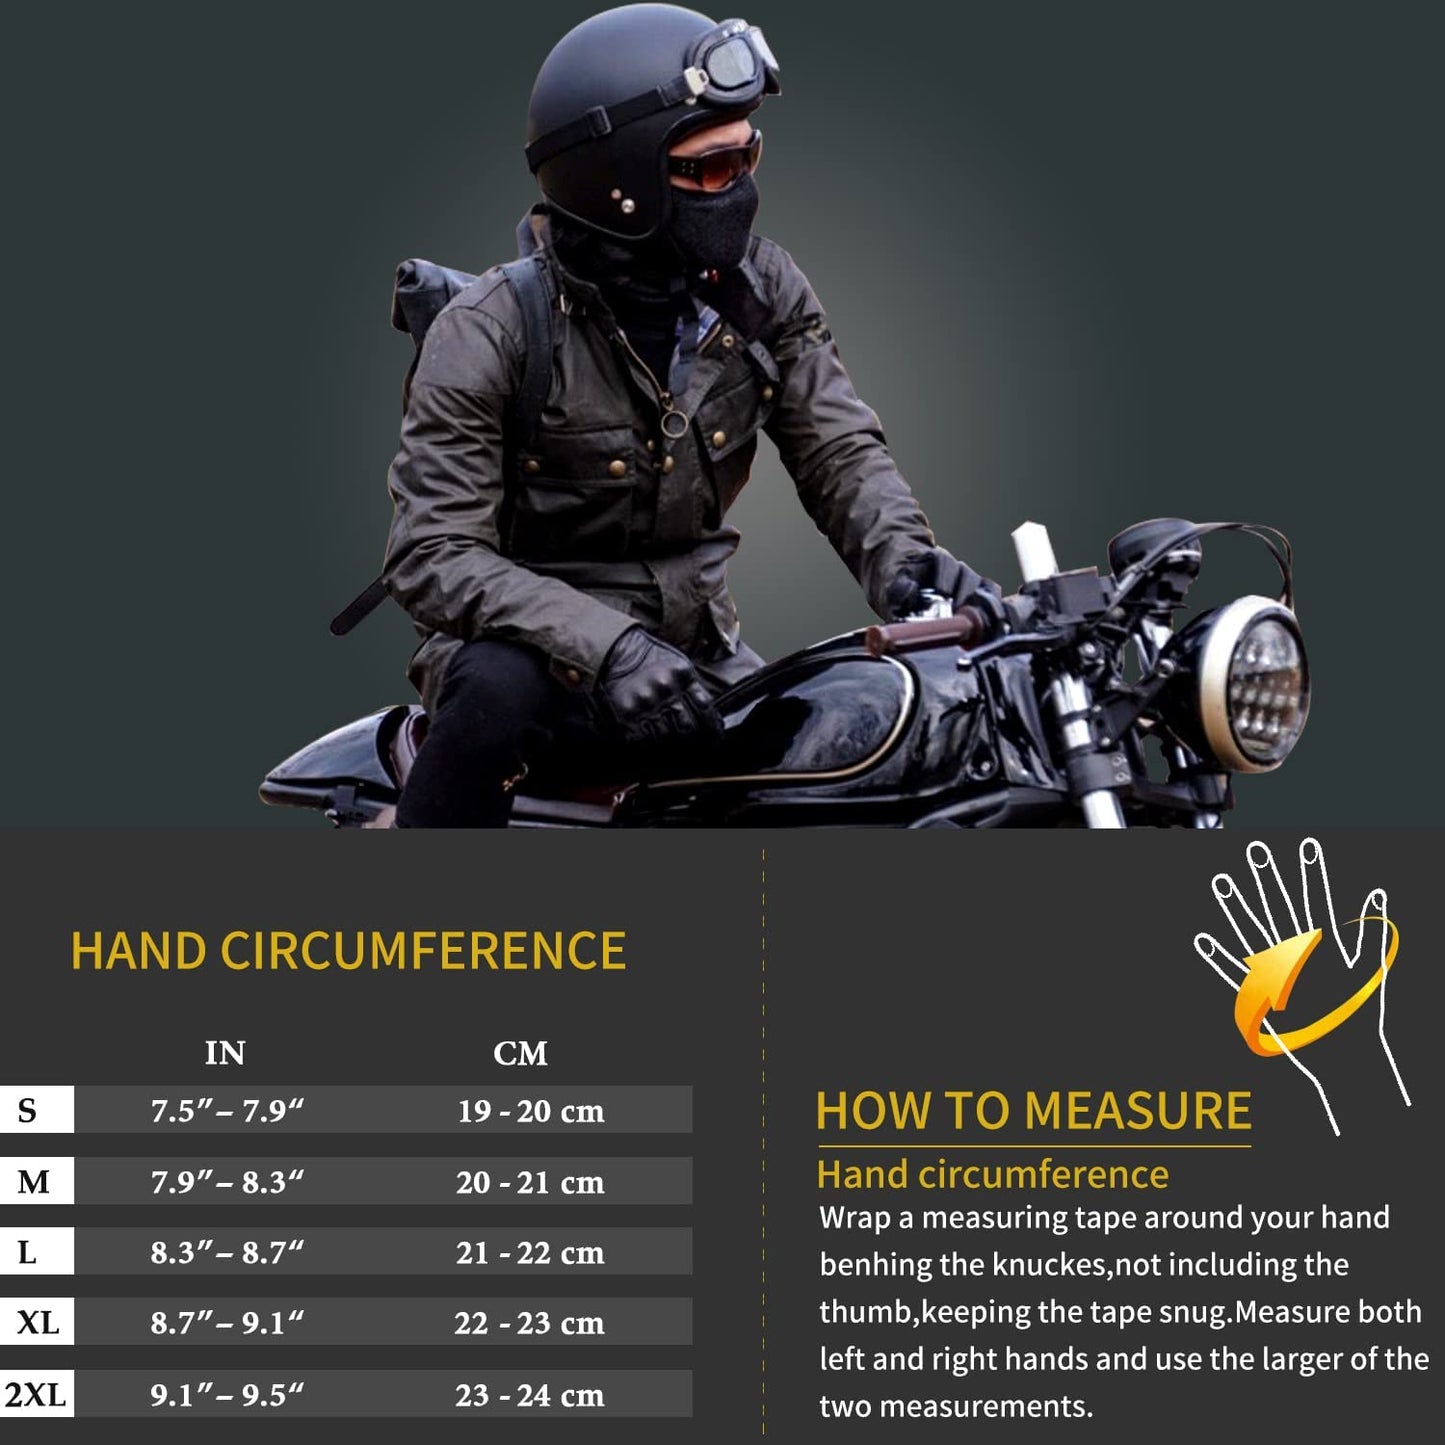 Exclusivo Mezcla Leather Motorcycle Gloves for Men,Riding Driving Biker Racing Motorbike Glove Touchscreen with Hard Knuckle Protection